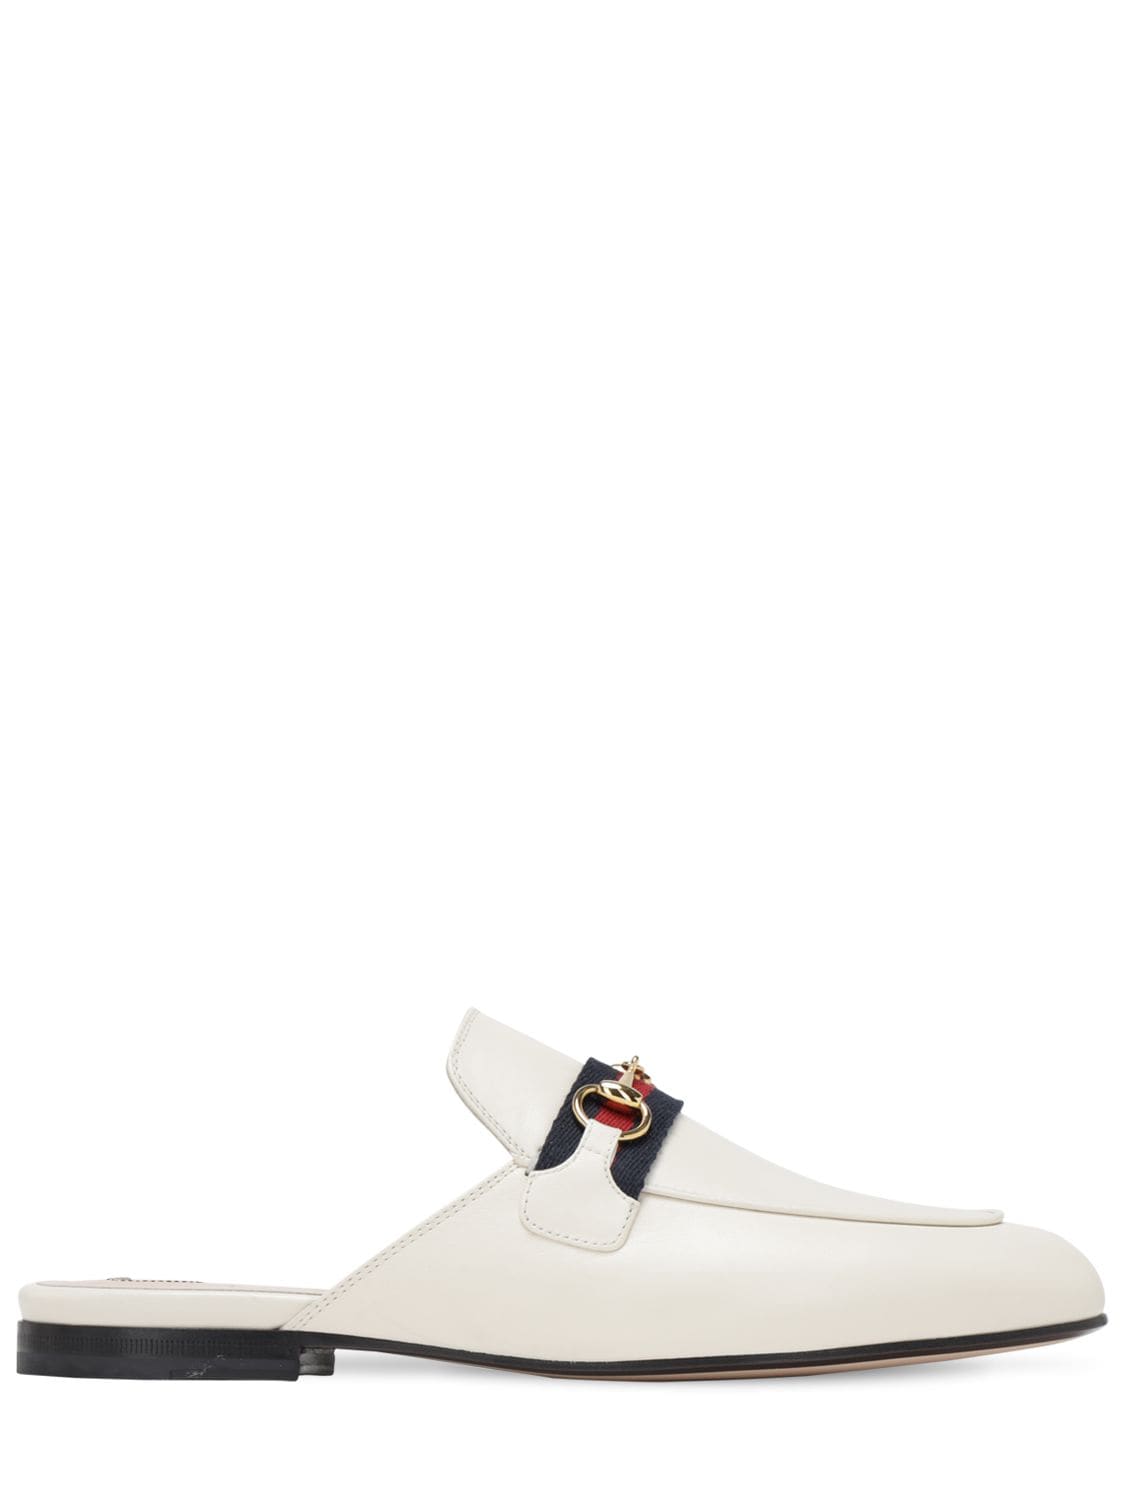 GUCCI 10mm Princetown Leather Mules